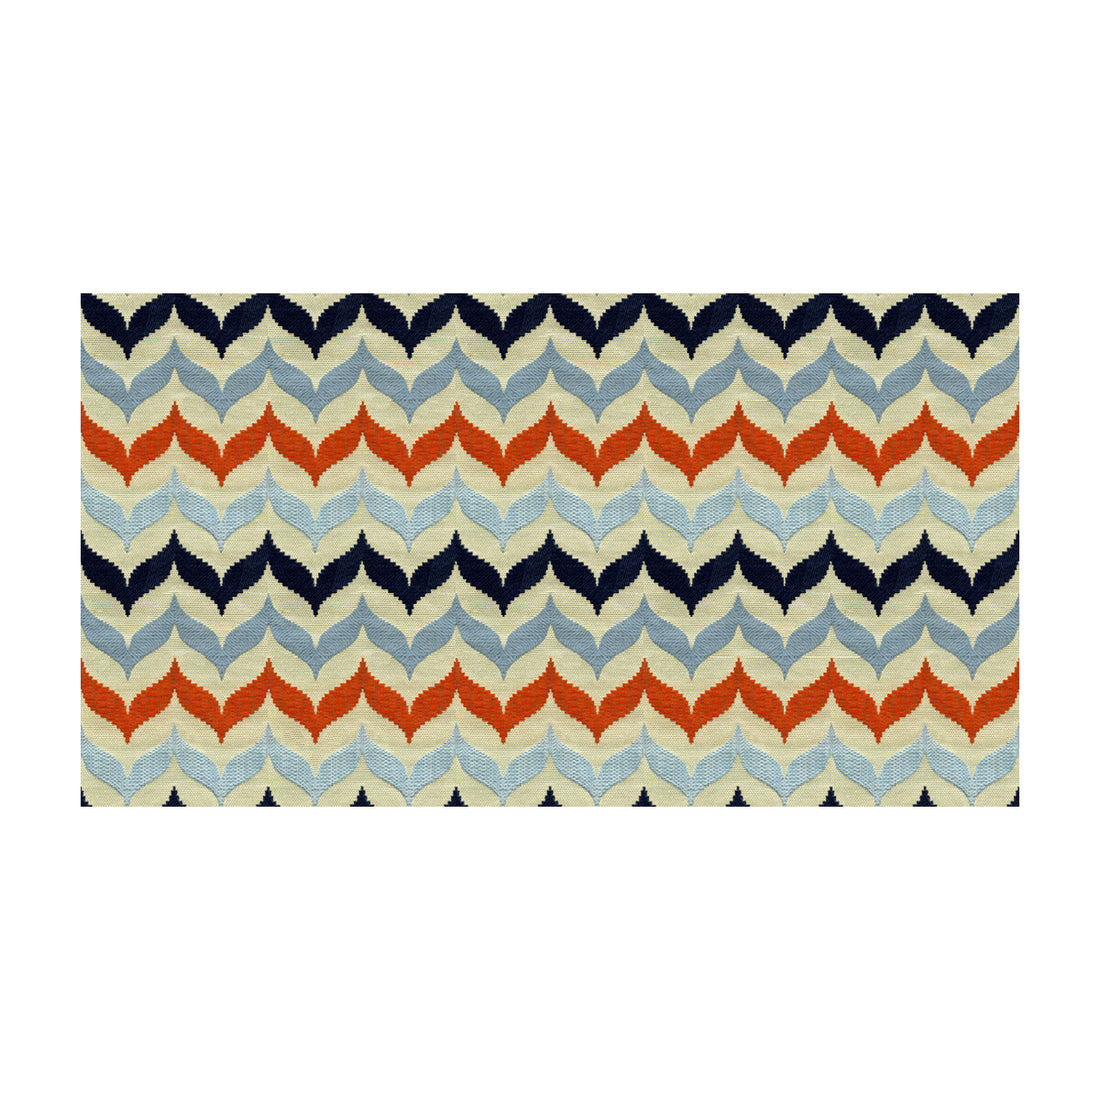 Andora fabric in castaway color - pattern 33640.512.0 - by Kravet Contract in the Jonathan Adler Clarity collection